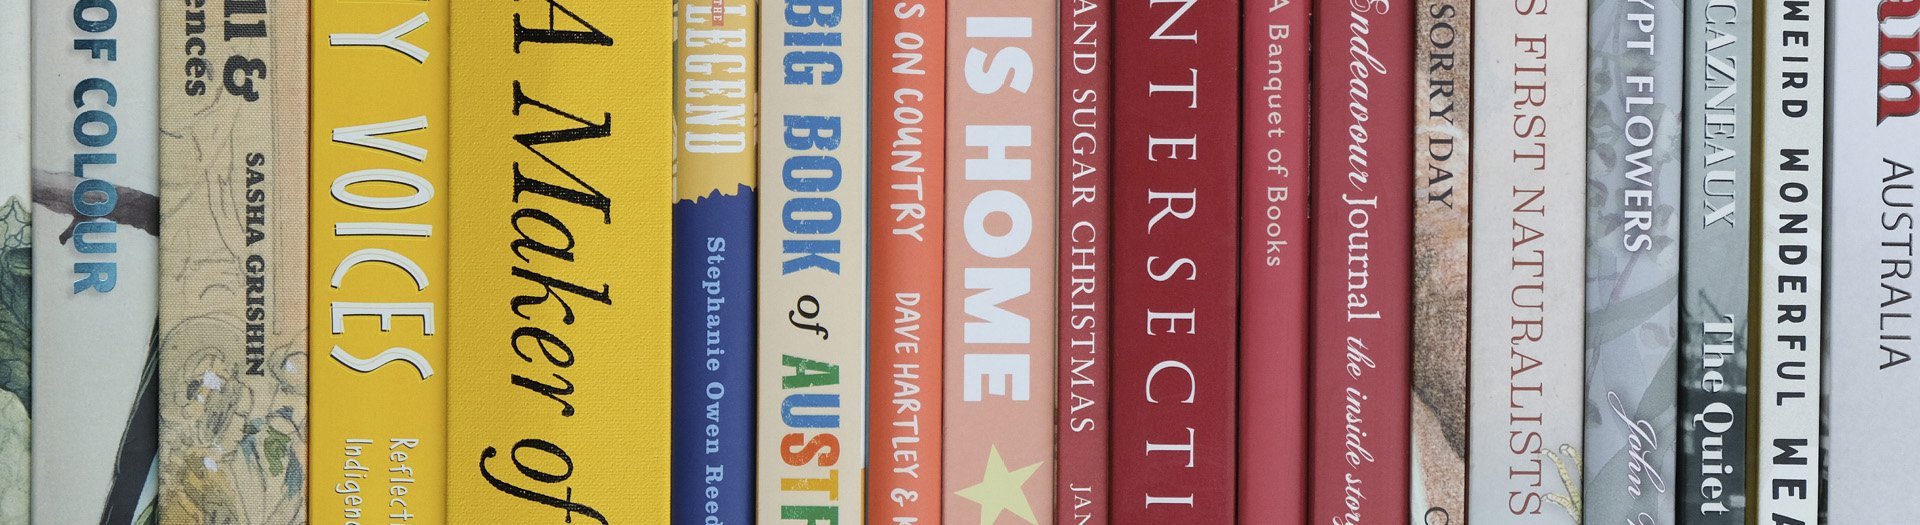 Multicoloured spines of vertical books